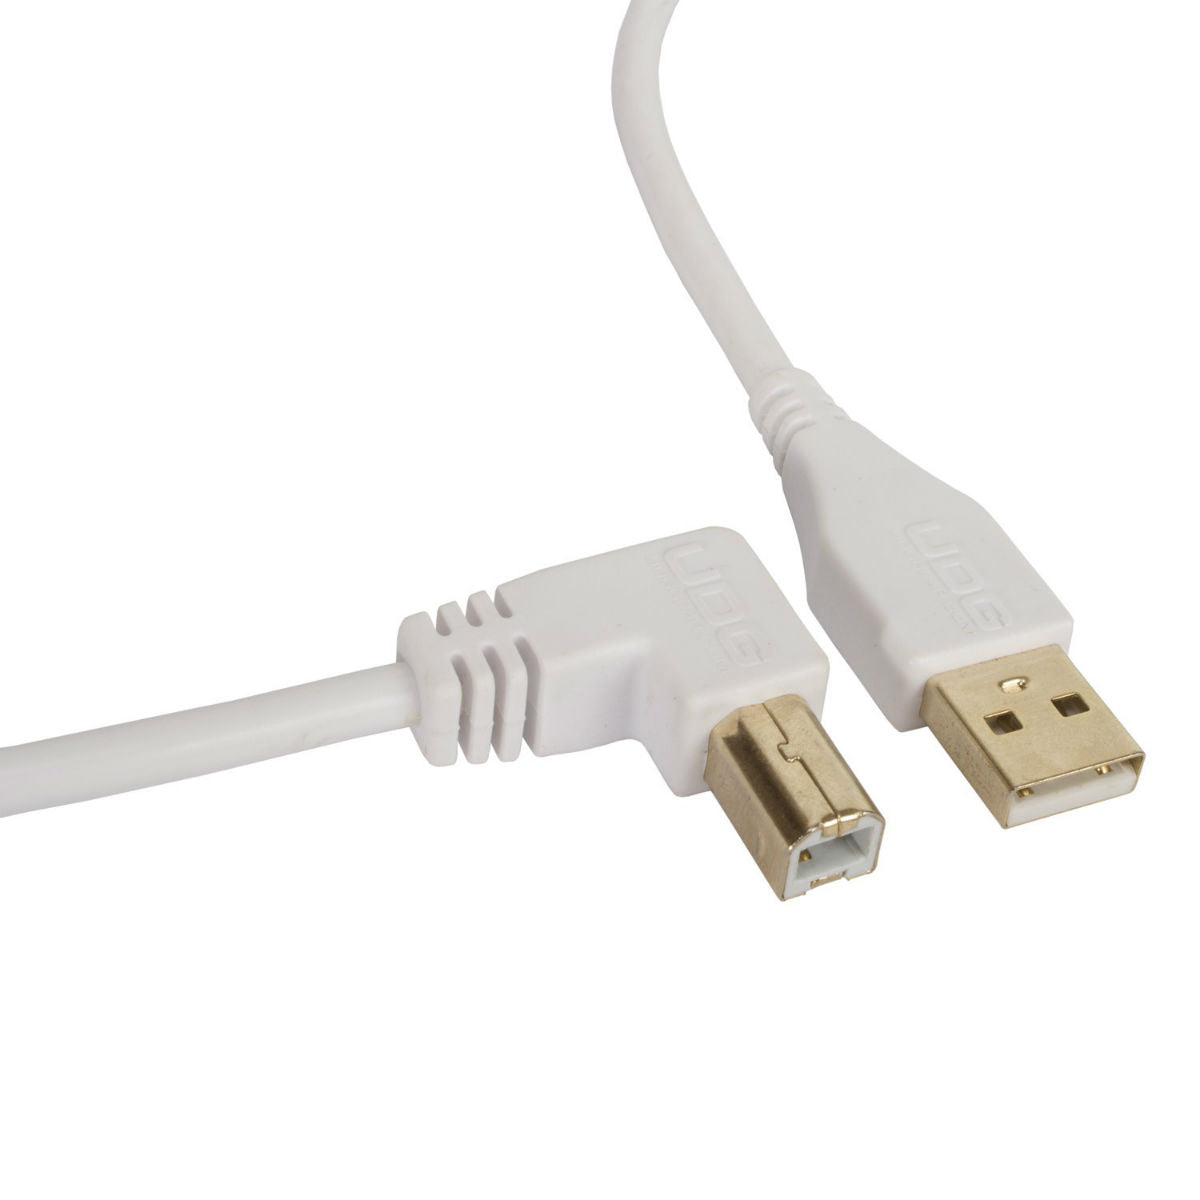 UDG USB Cable A-B 2m White Angled U95005WH